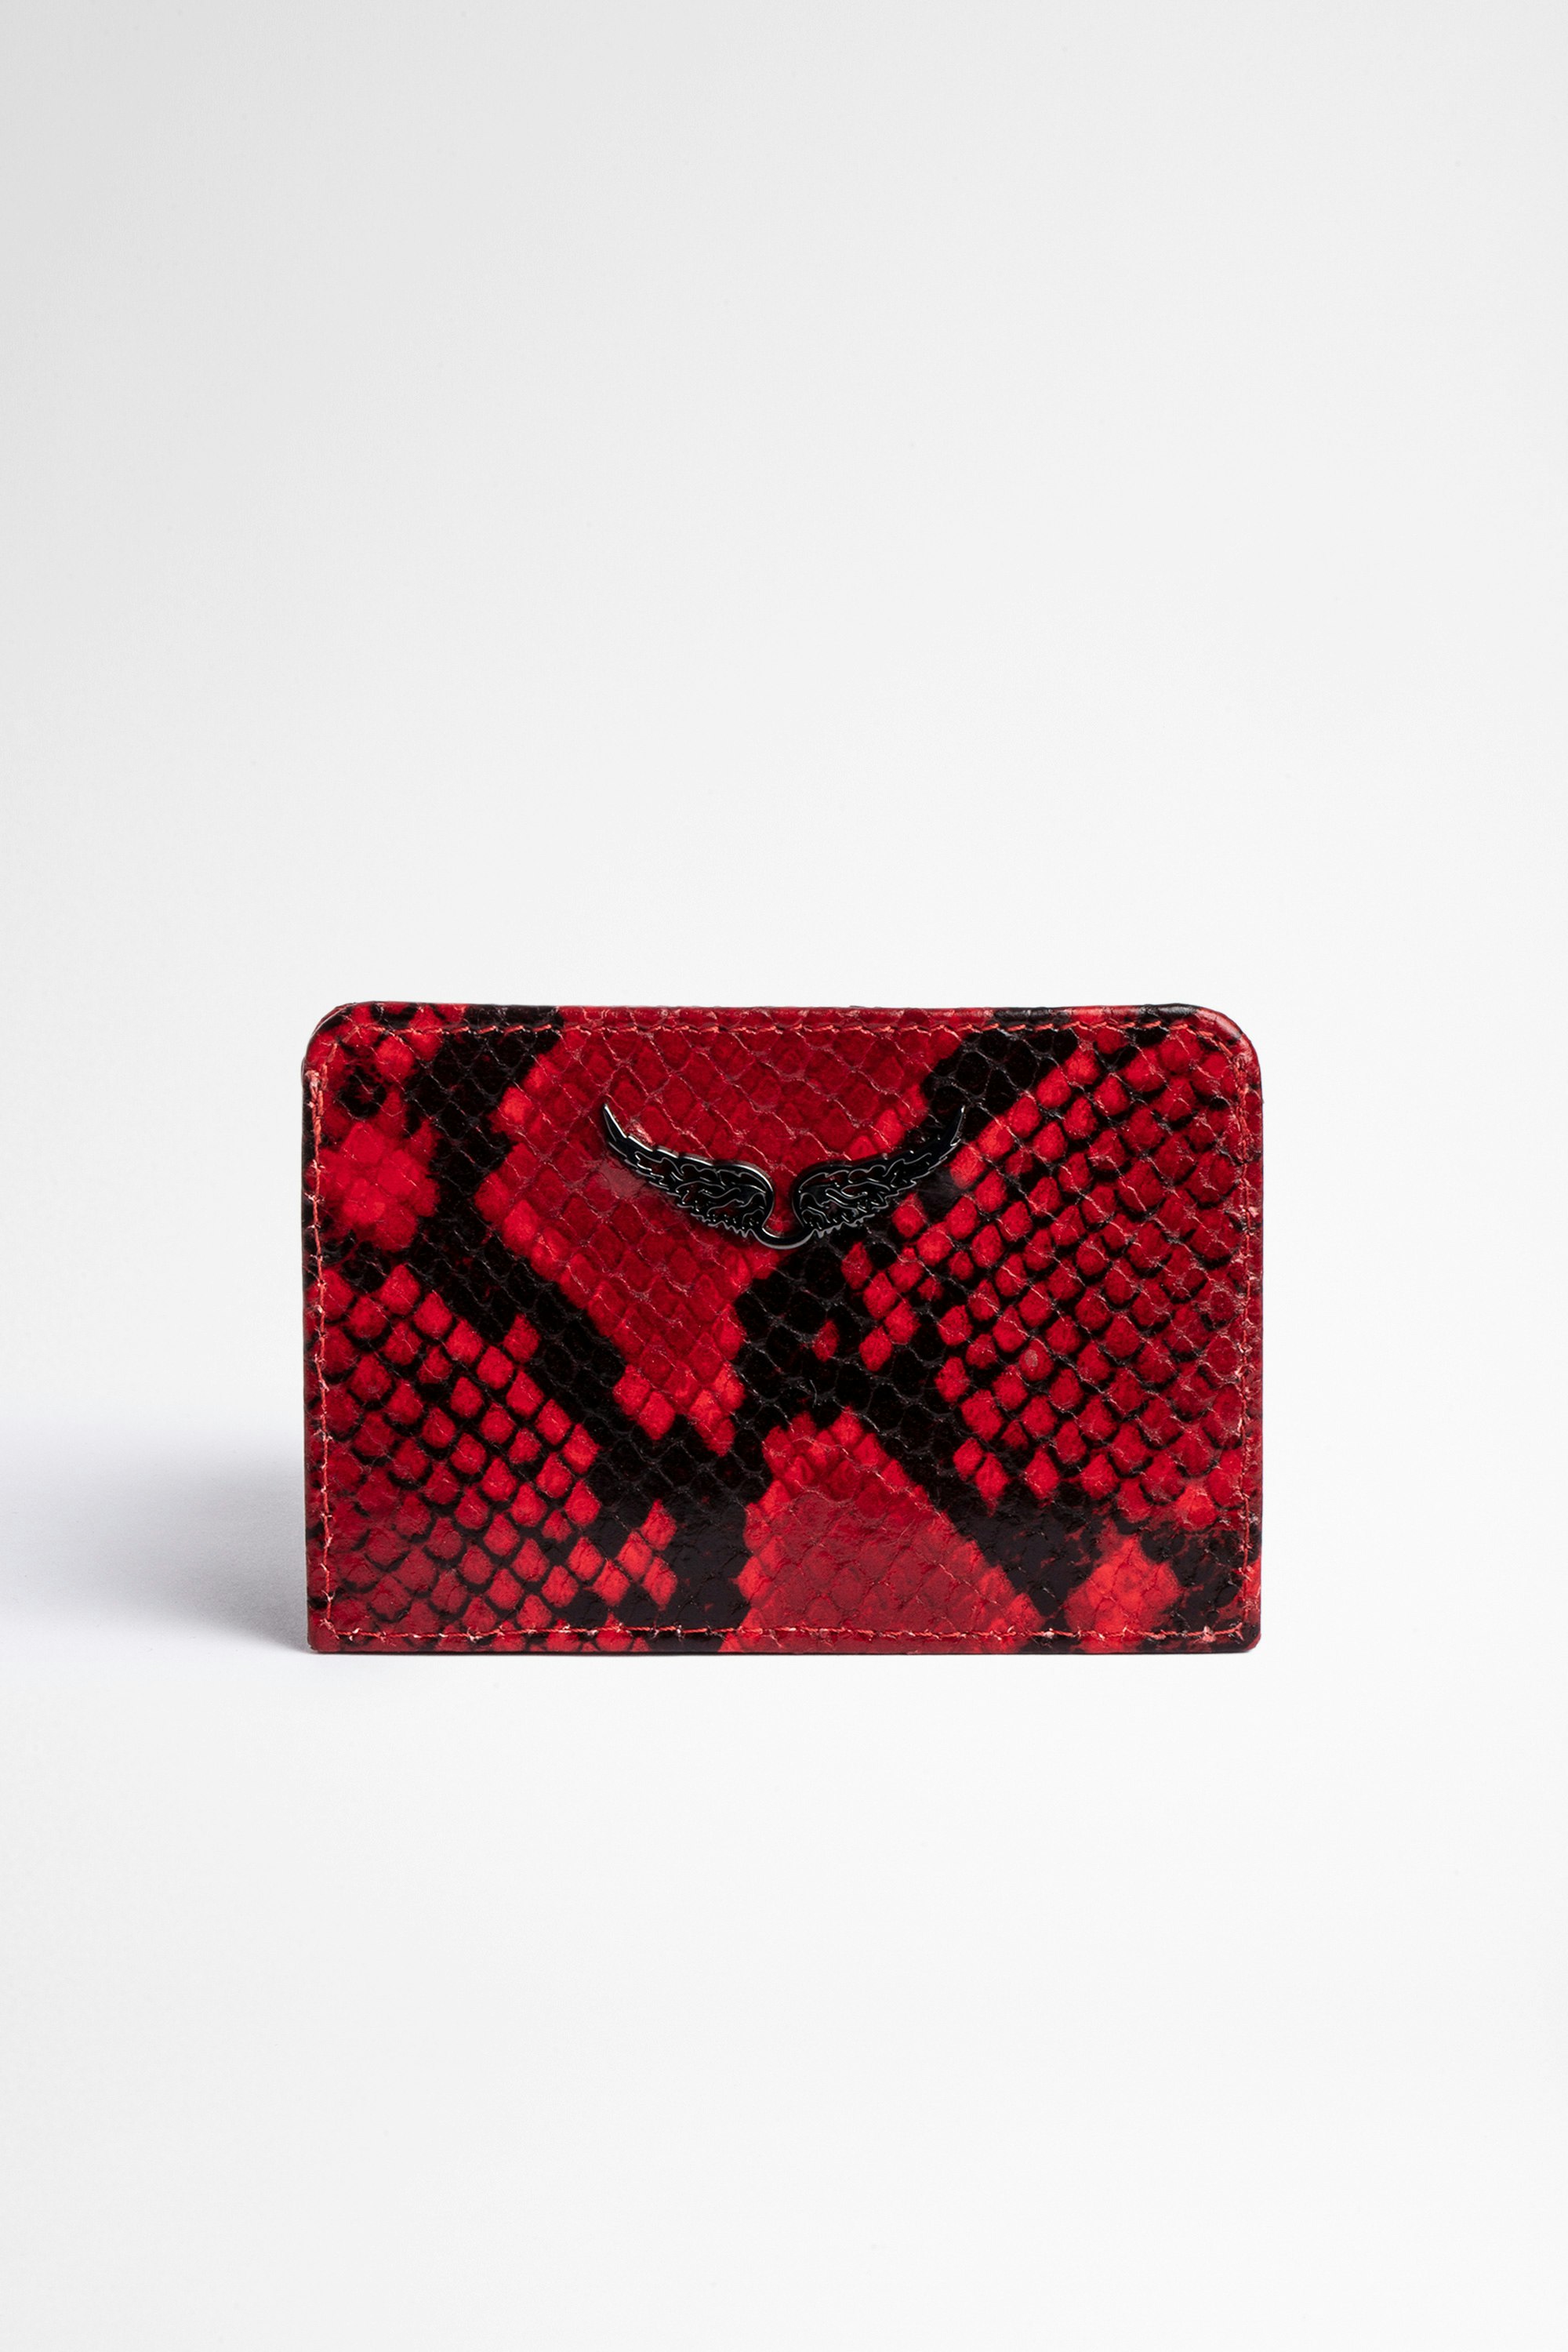 ZV Pass Card Holder Women's red leather card holder with snakeskin effect